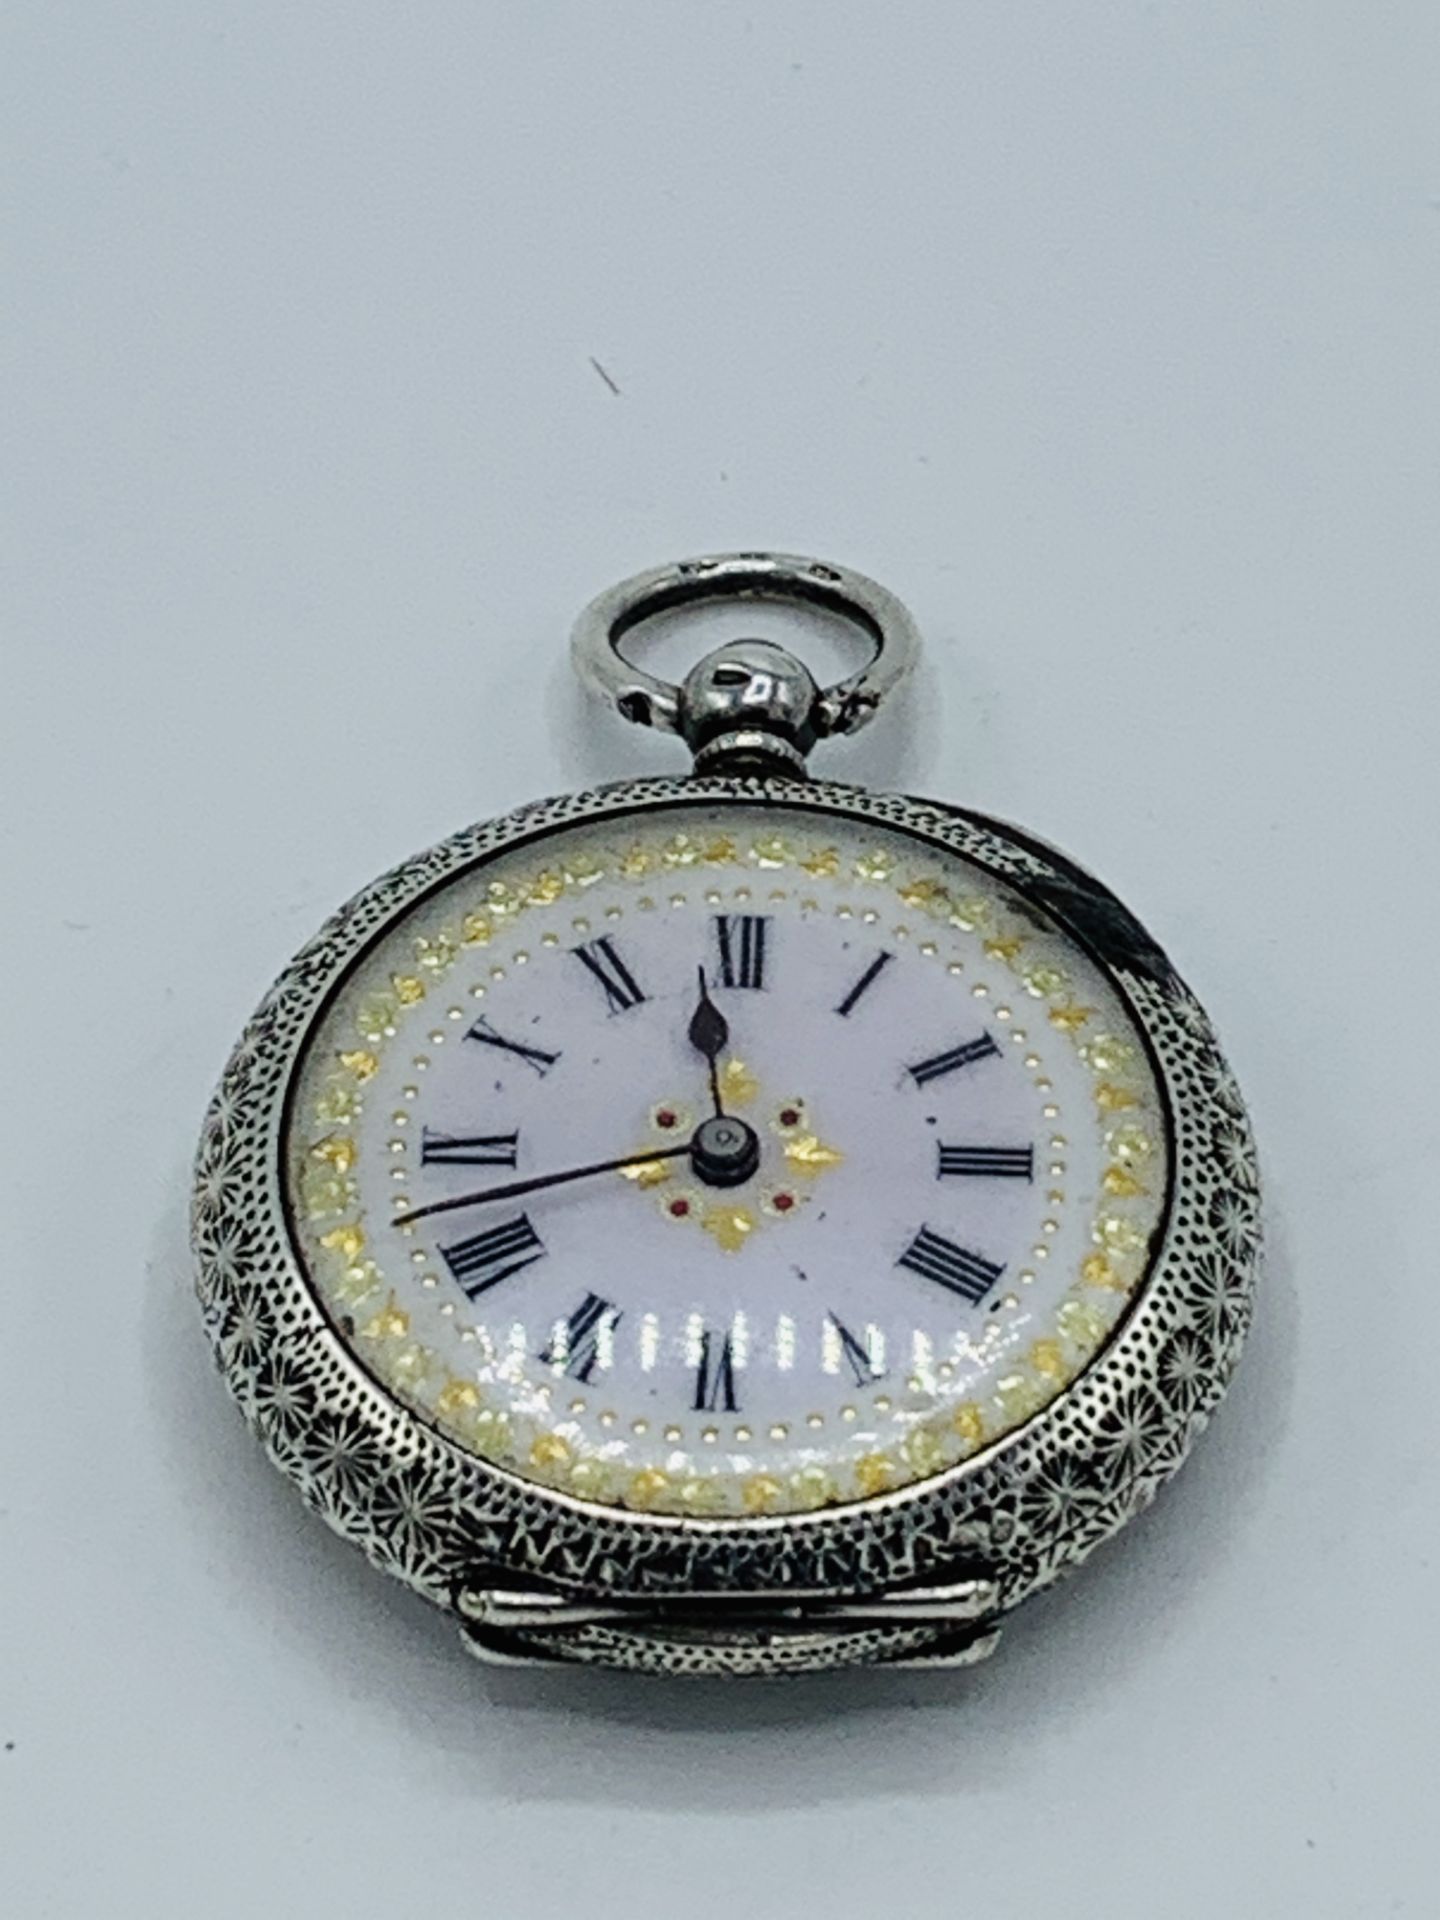 Lady's fob watch hallmarked 935, with white enamel face, and winding key.